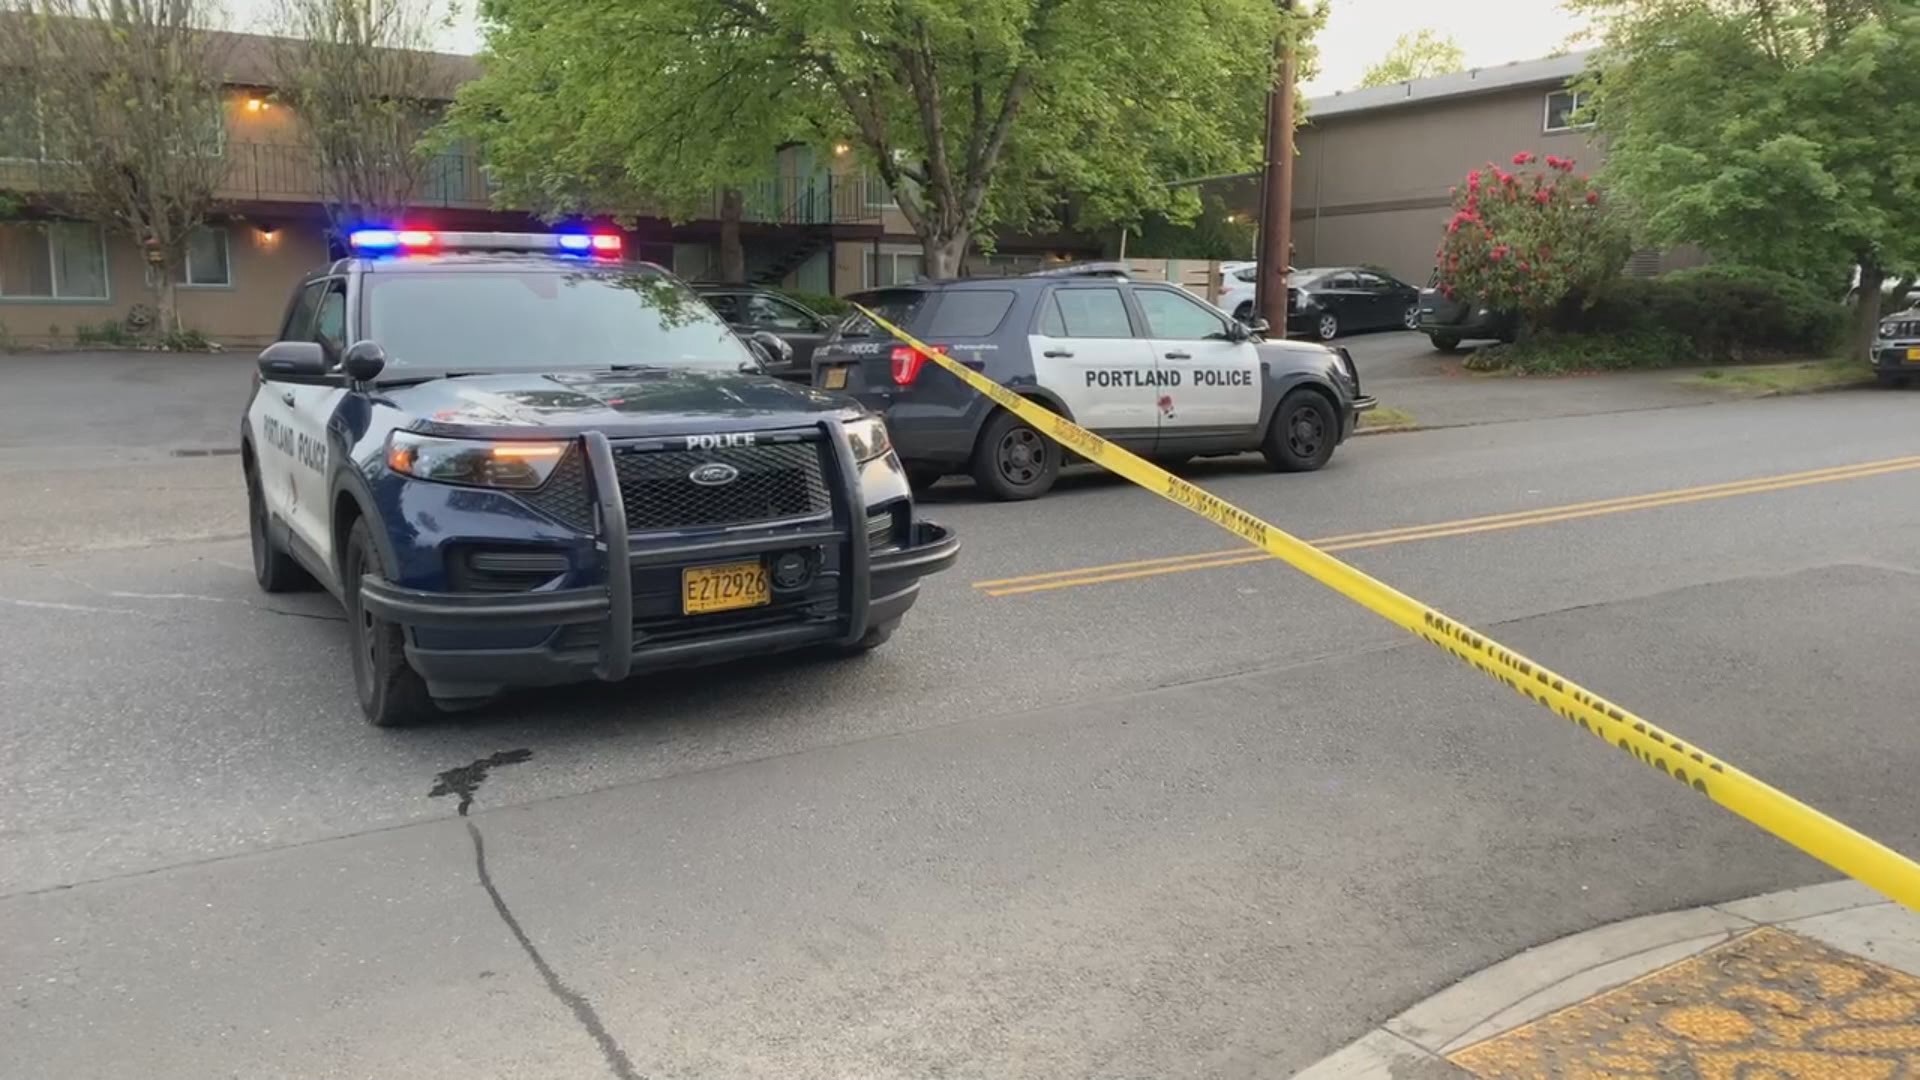 Officers responded to a report of a shooting in the 2800 block of Southeast Division Street on May 4. When they arrived, they found a man dead inside an apartment.